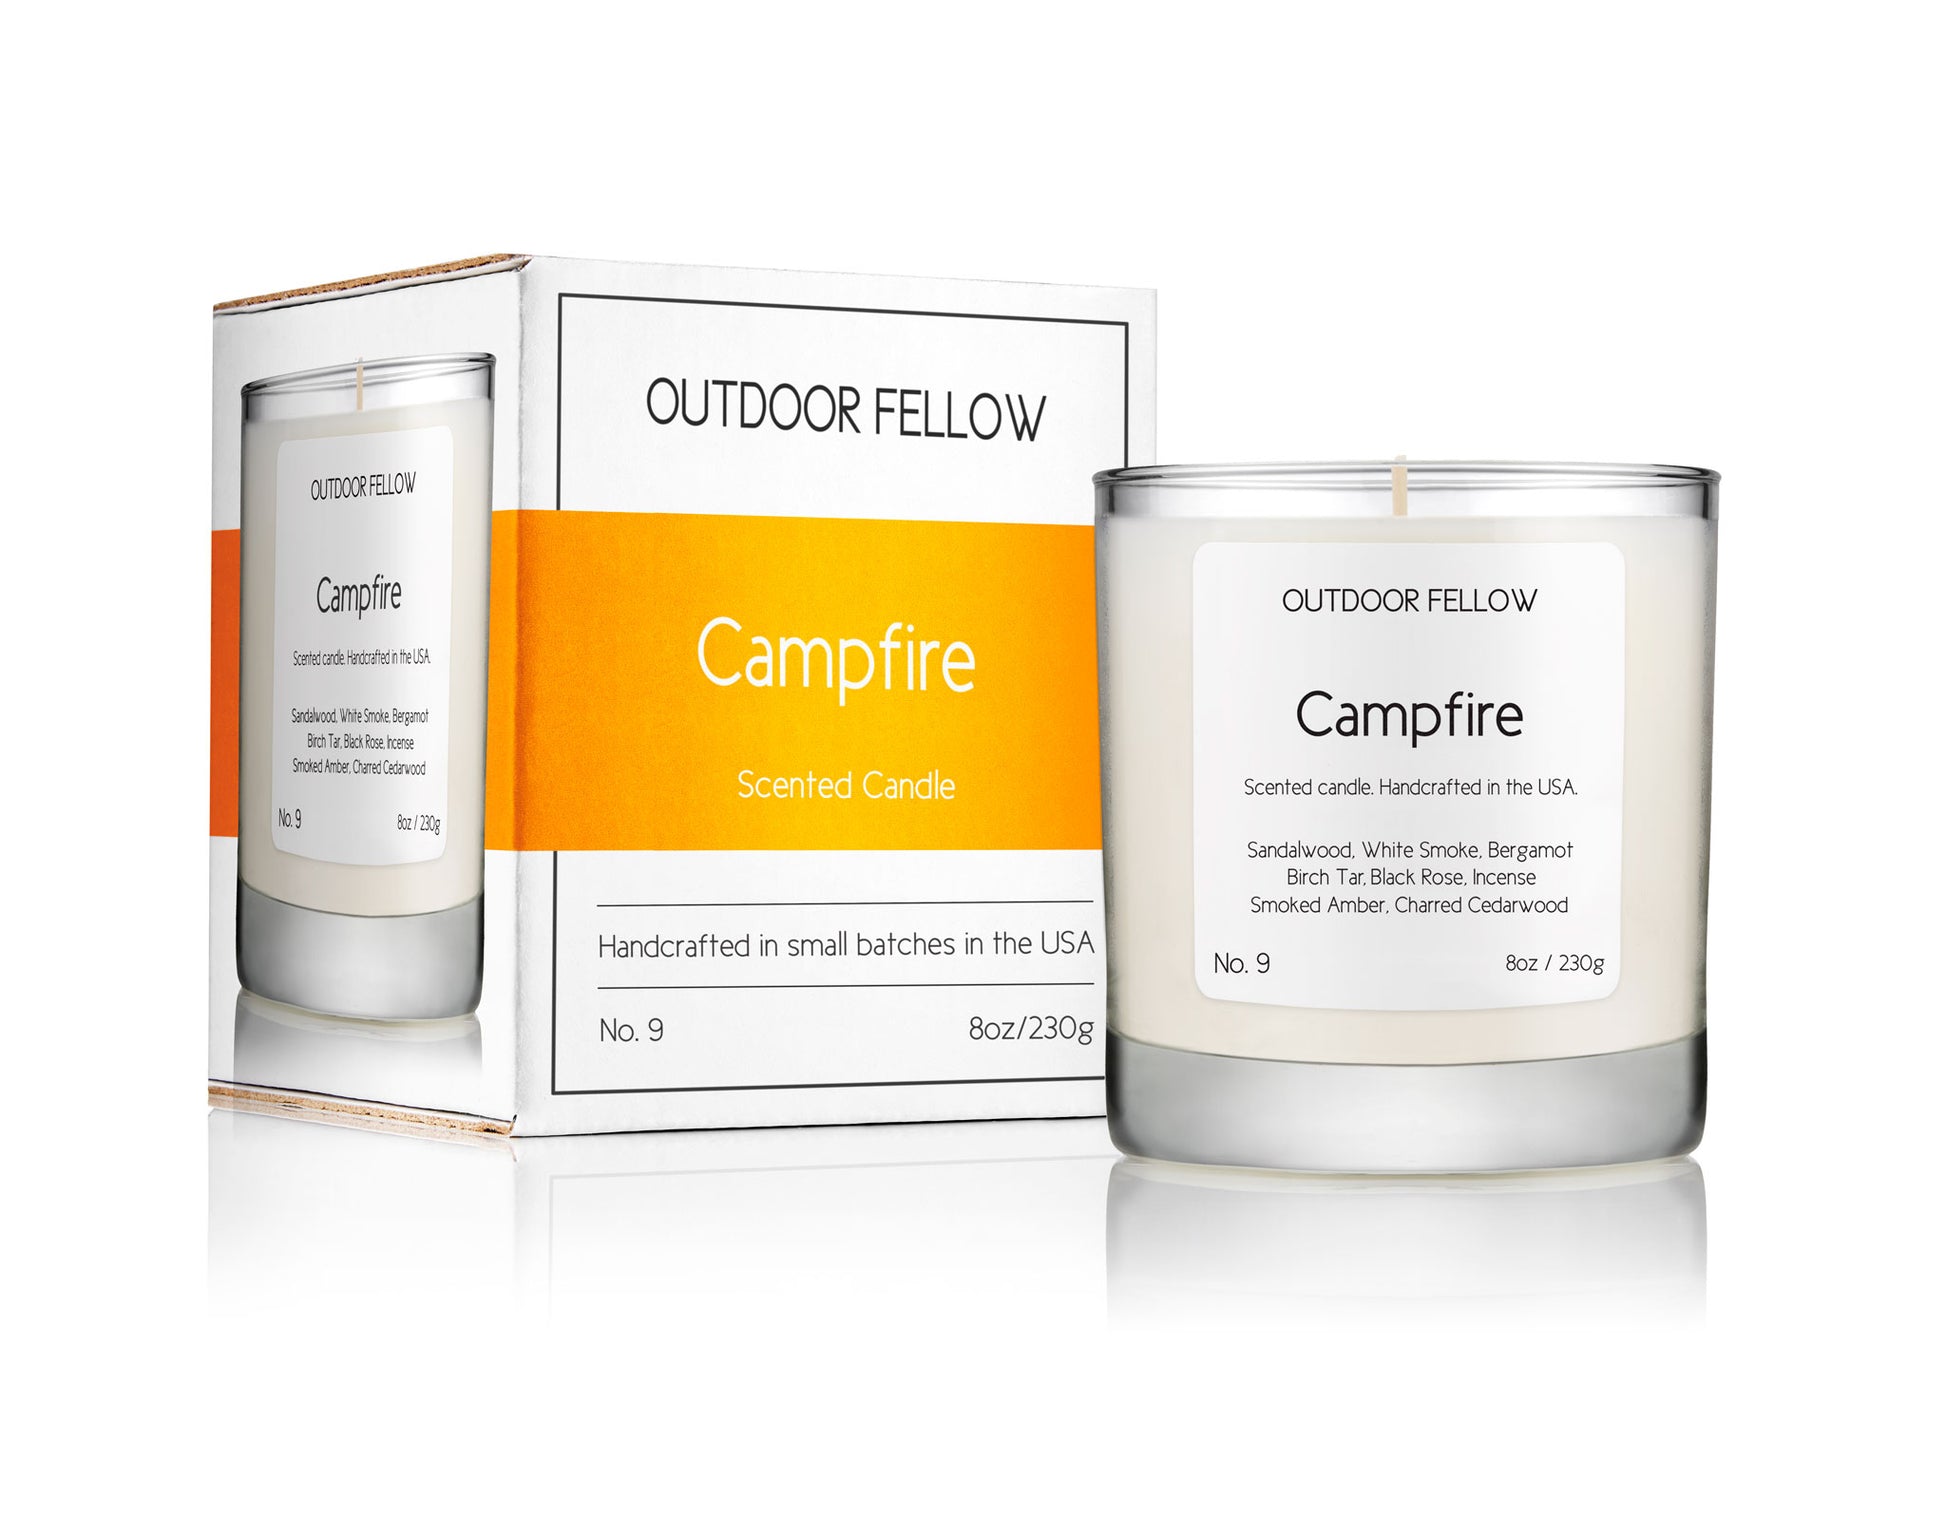 Campfire scented candle with carton